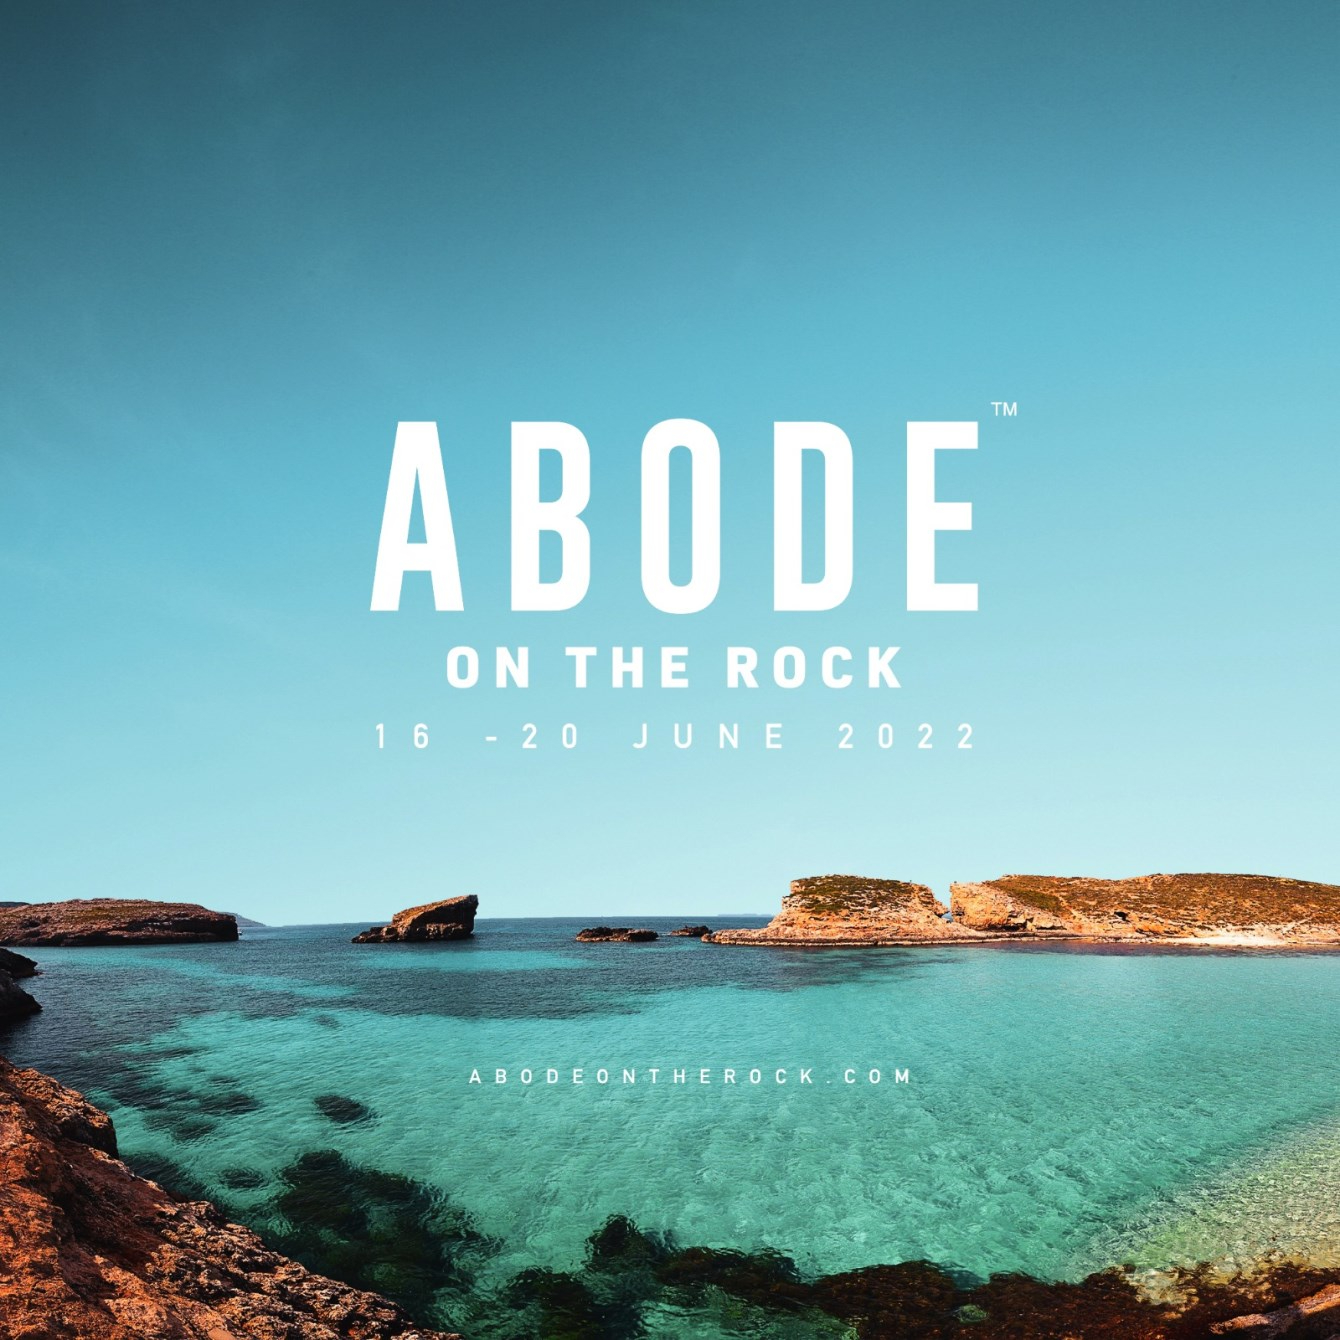 Abode on the rock 2023